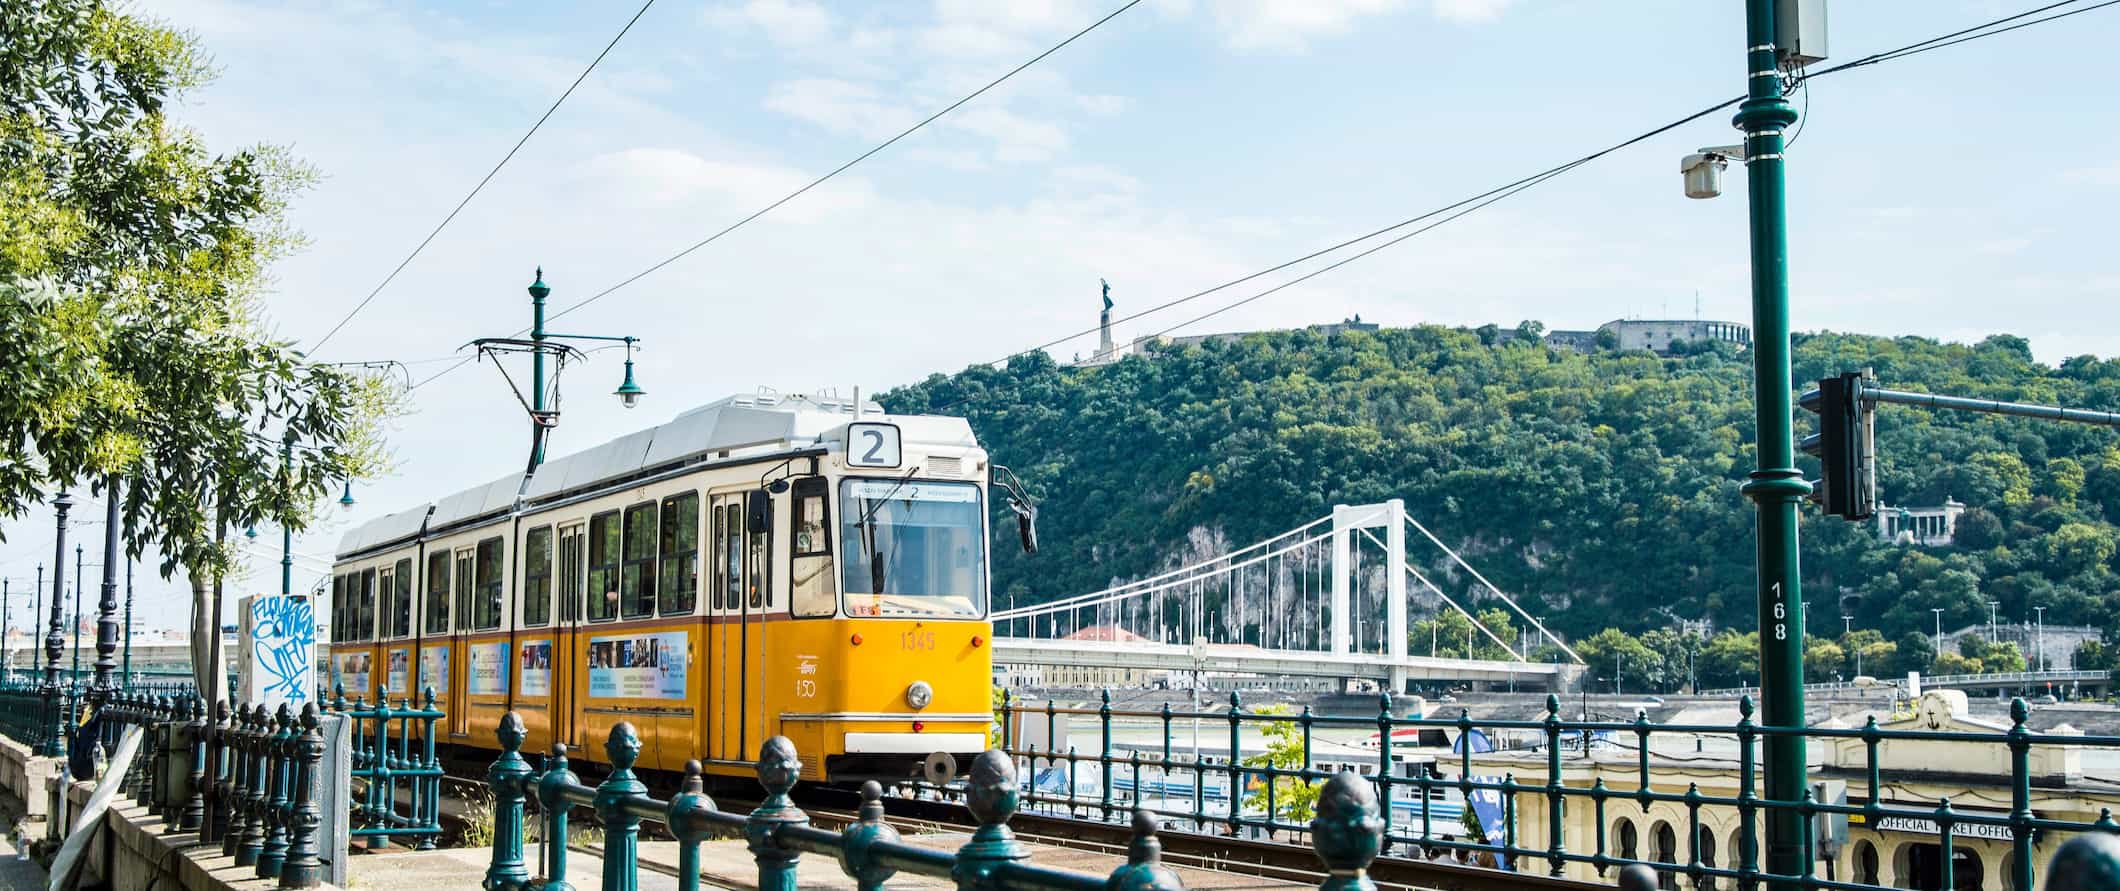 A yellow tram rolling along on a sunny day in Budapest, Hungary